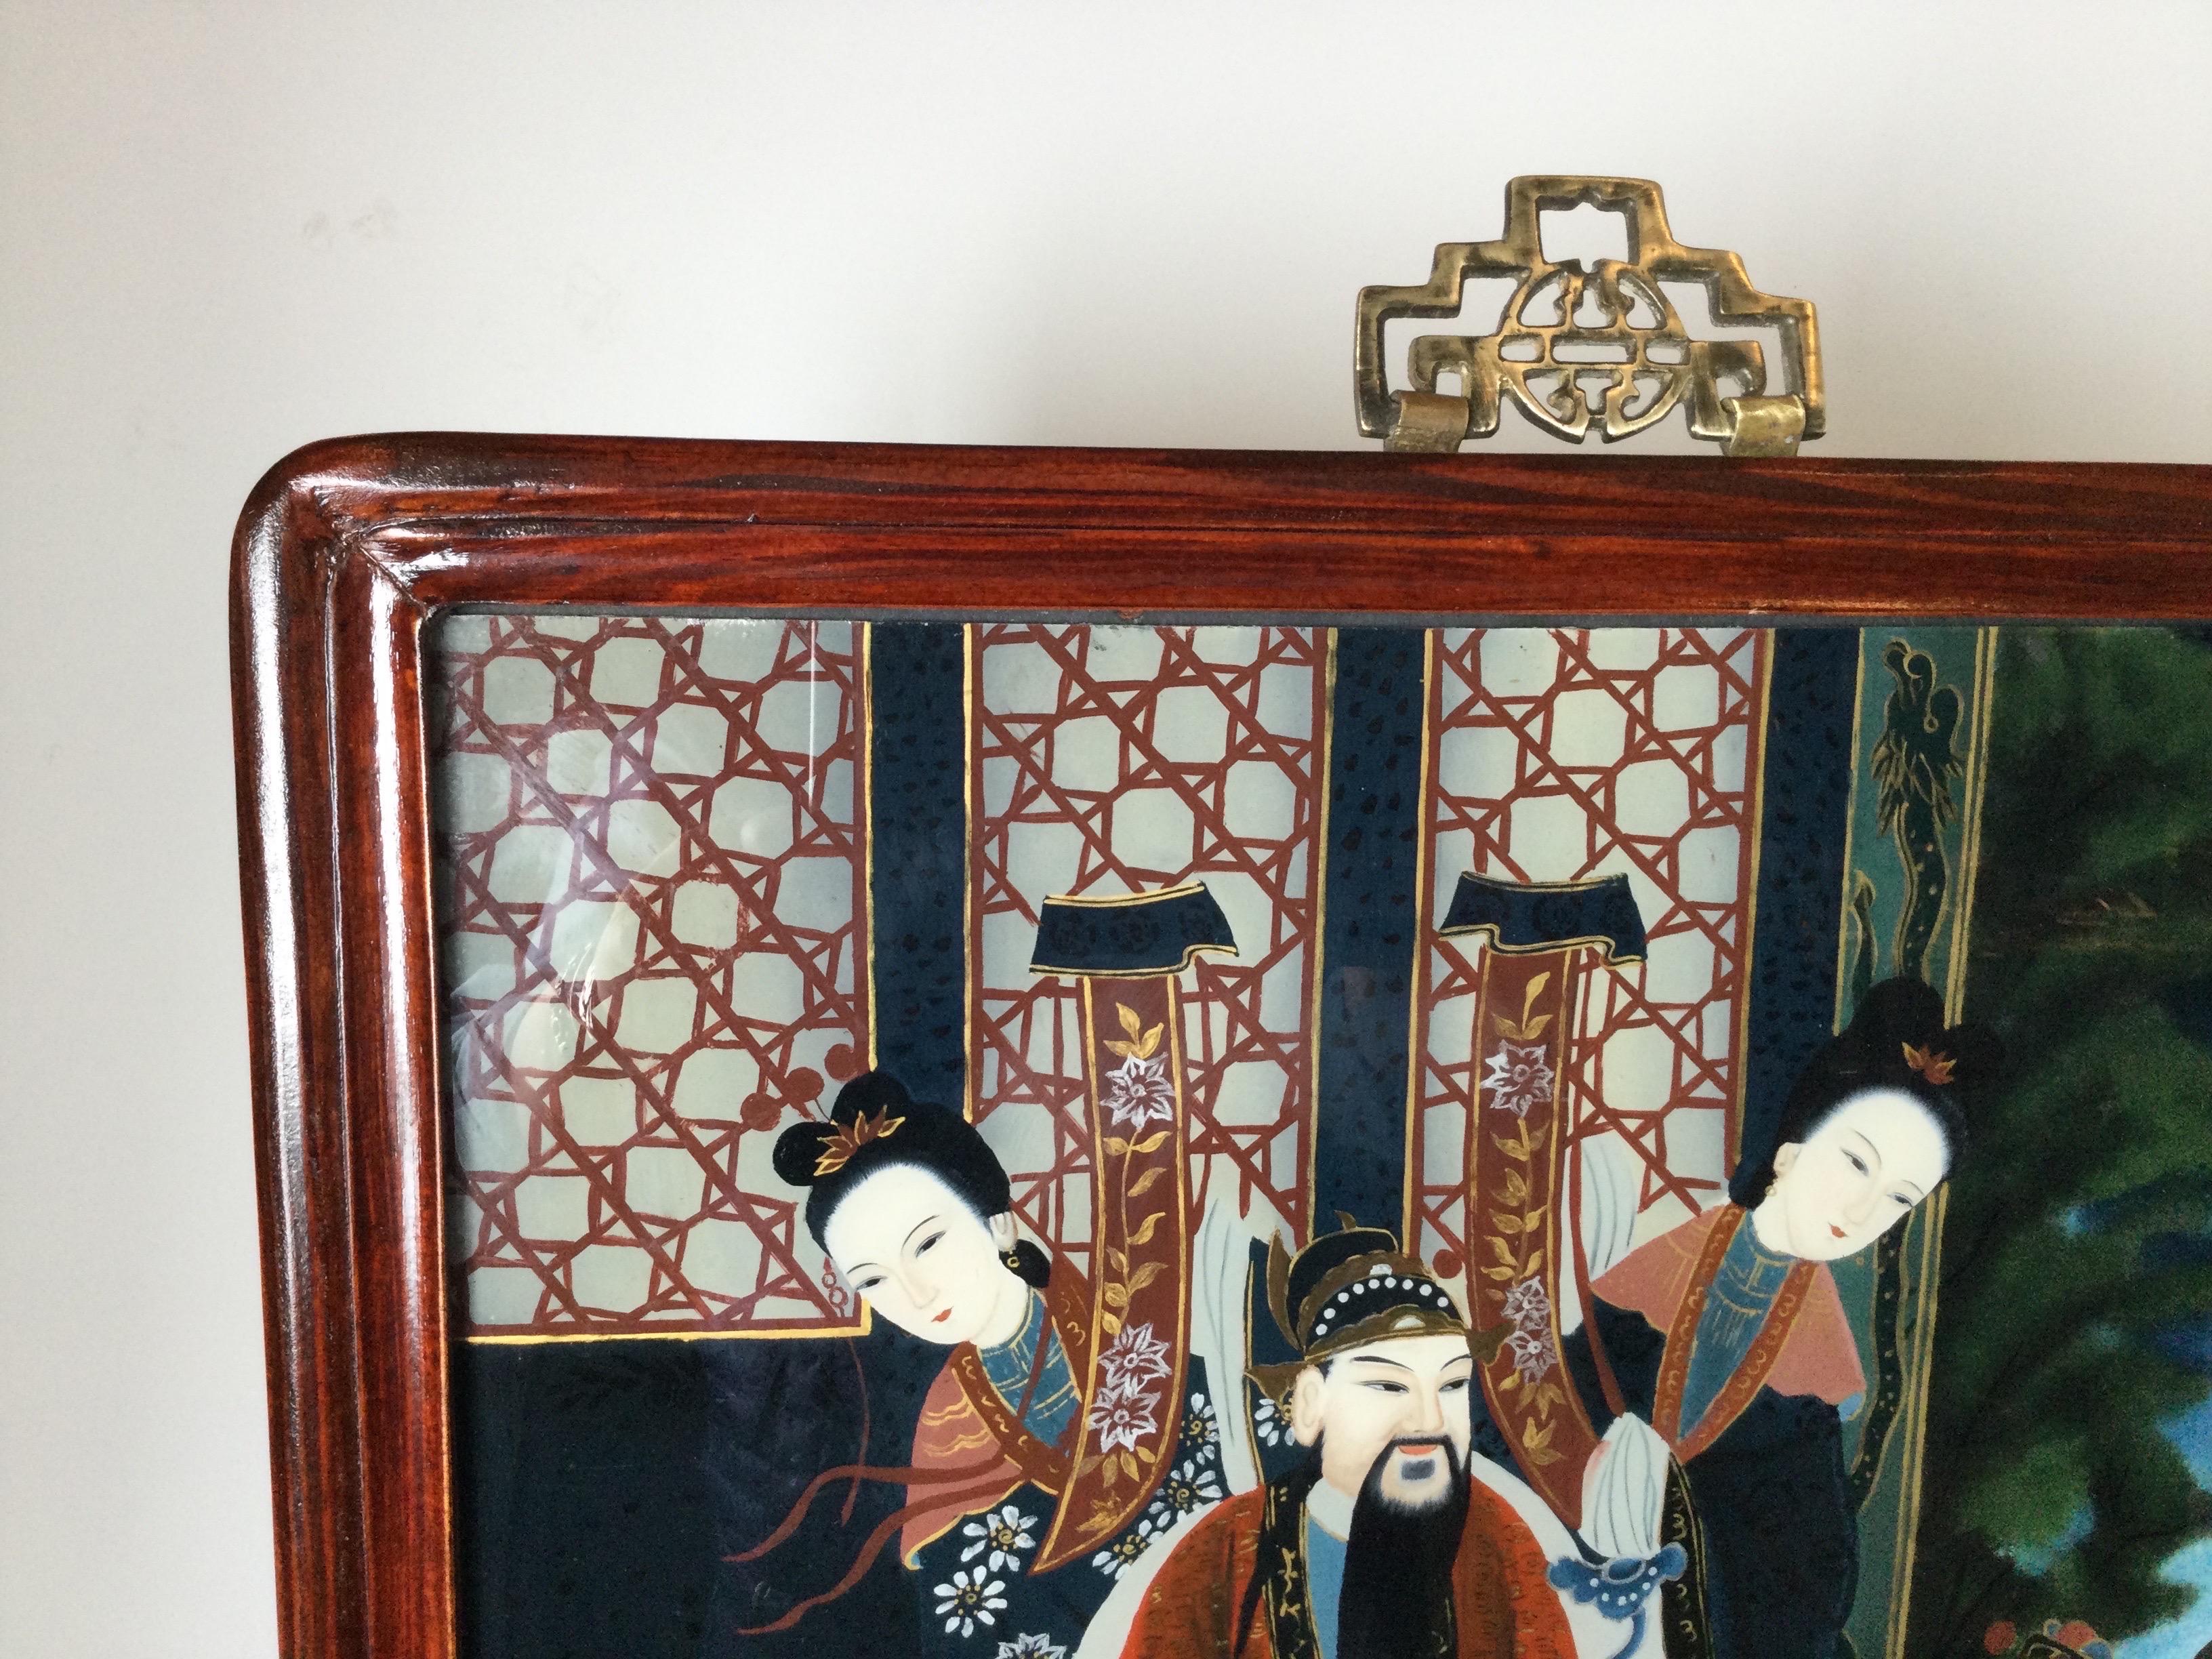 A pair of beautifully painted Japanese noble men and women groupings. The paintings are reverse painted on glass and framed in Asian style Hung-mu wood frames with cast brass hangers at the tops.